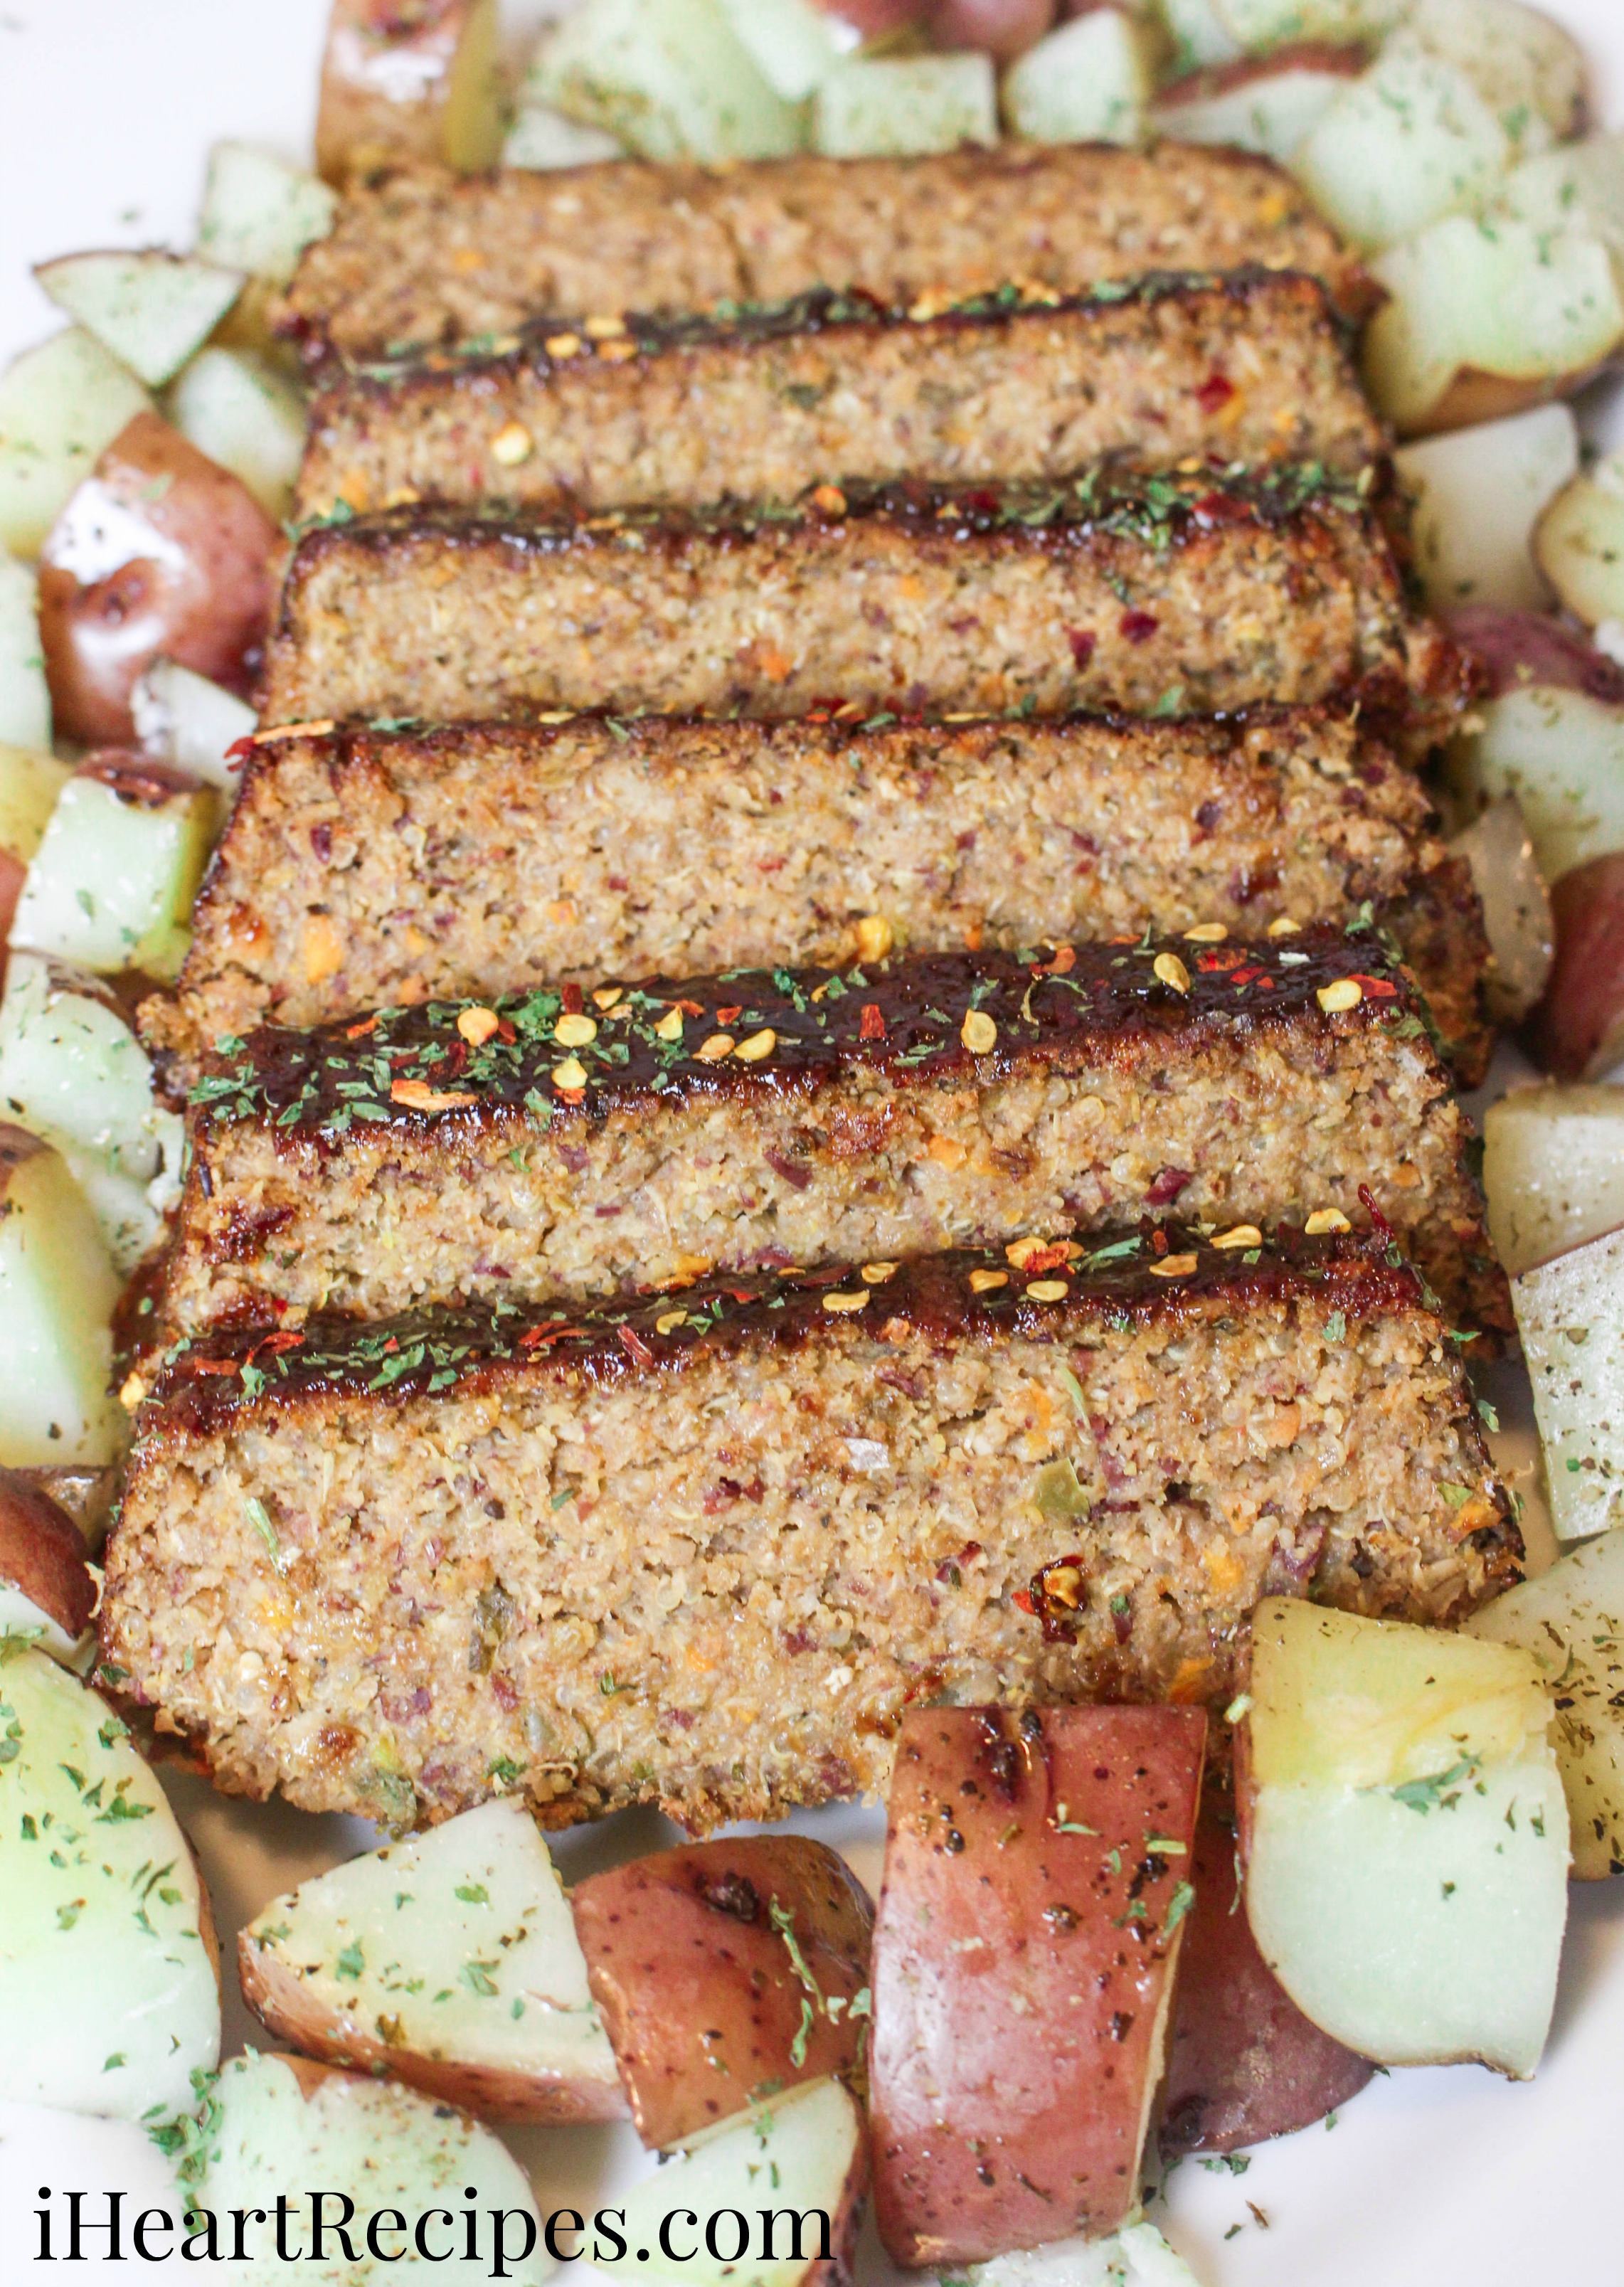 Perfectly seasoned vegetarian meatloaf served alongside fork-tender red potatoes on a white serving platter. This dish is so flavorful and filling!